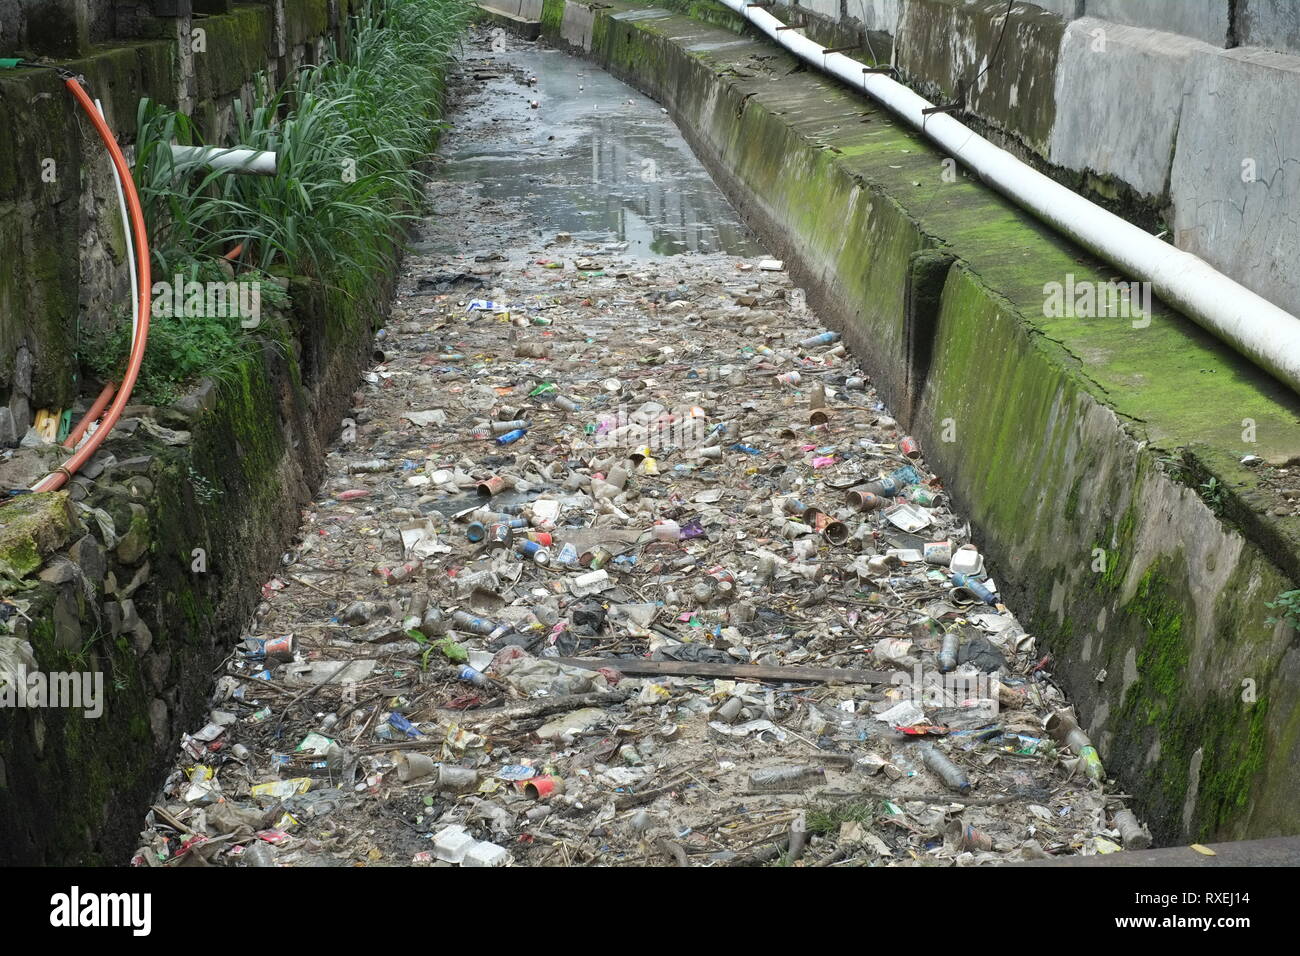 Plastics pollution in a city water trench. Stock Photo